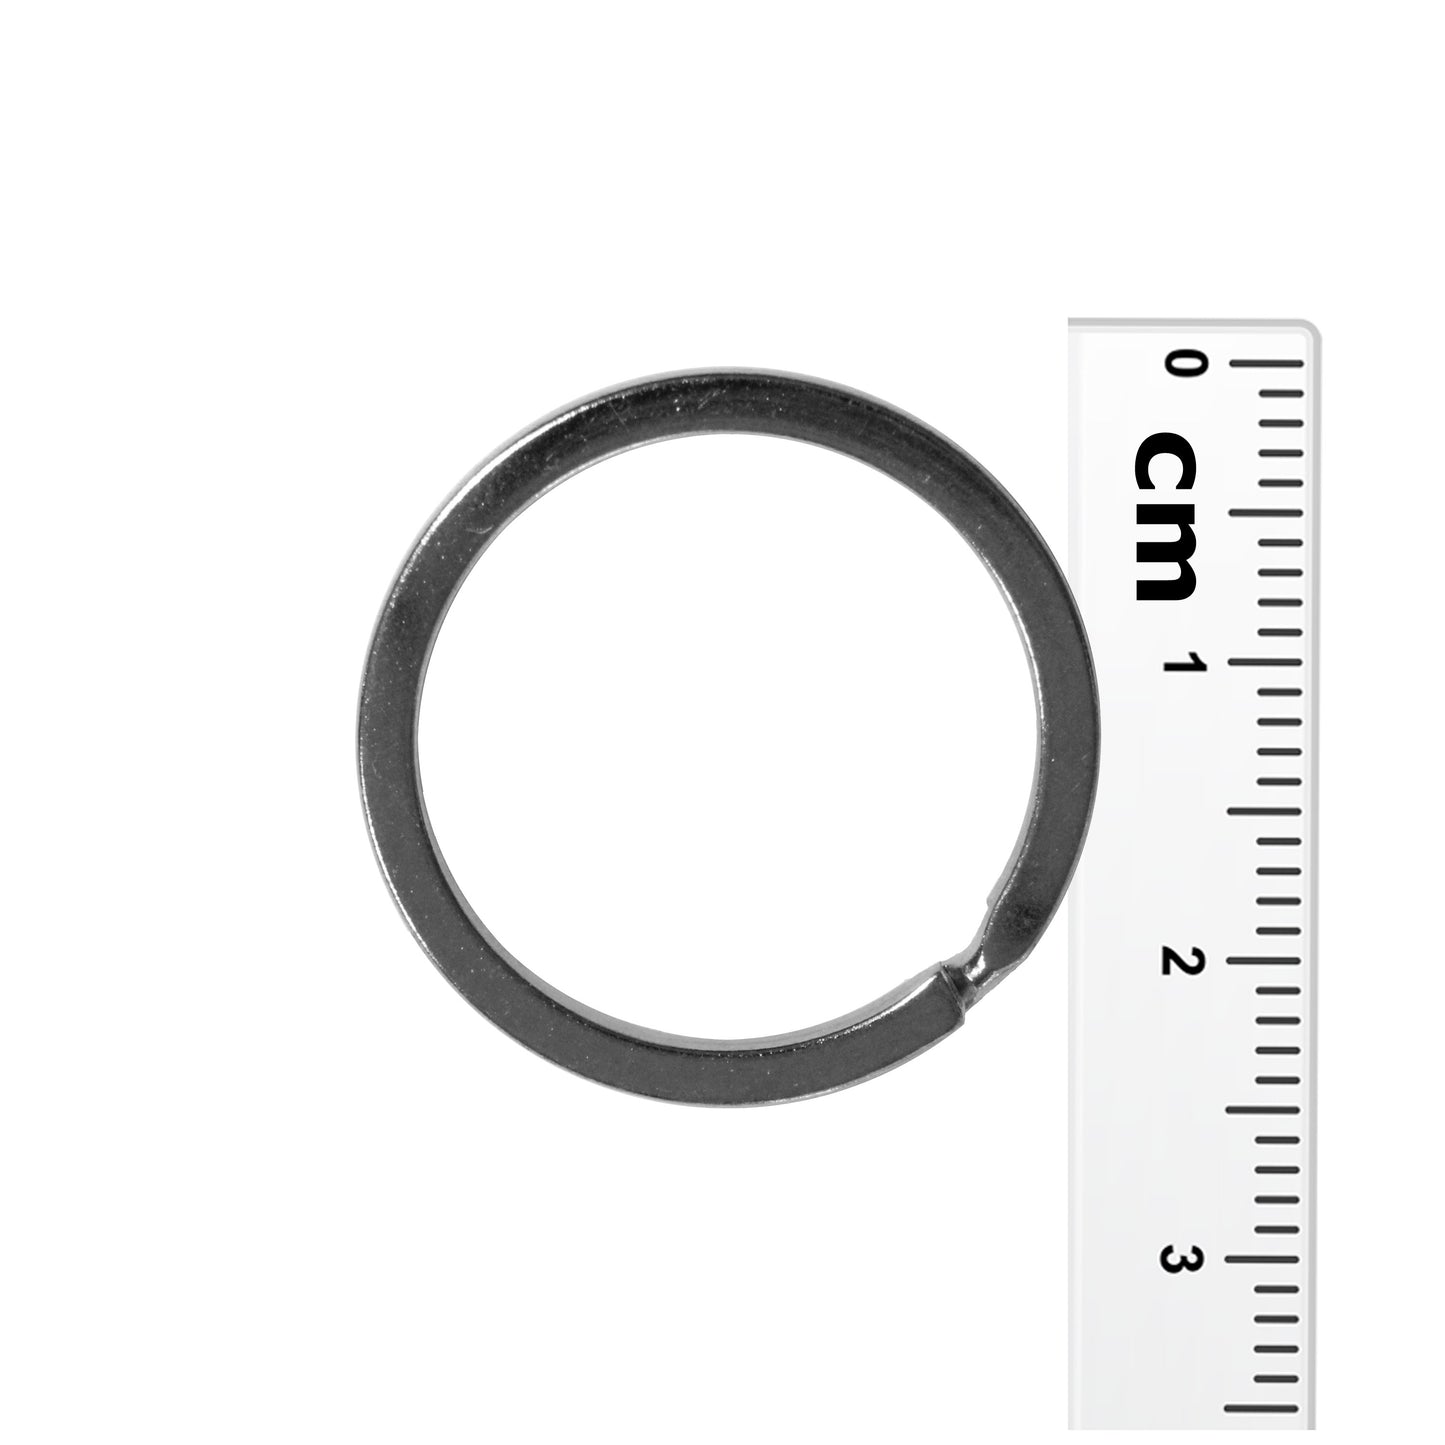 25mm Gunmetal Split Ring / sold individually / for key rings or secure charms or tags